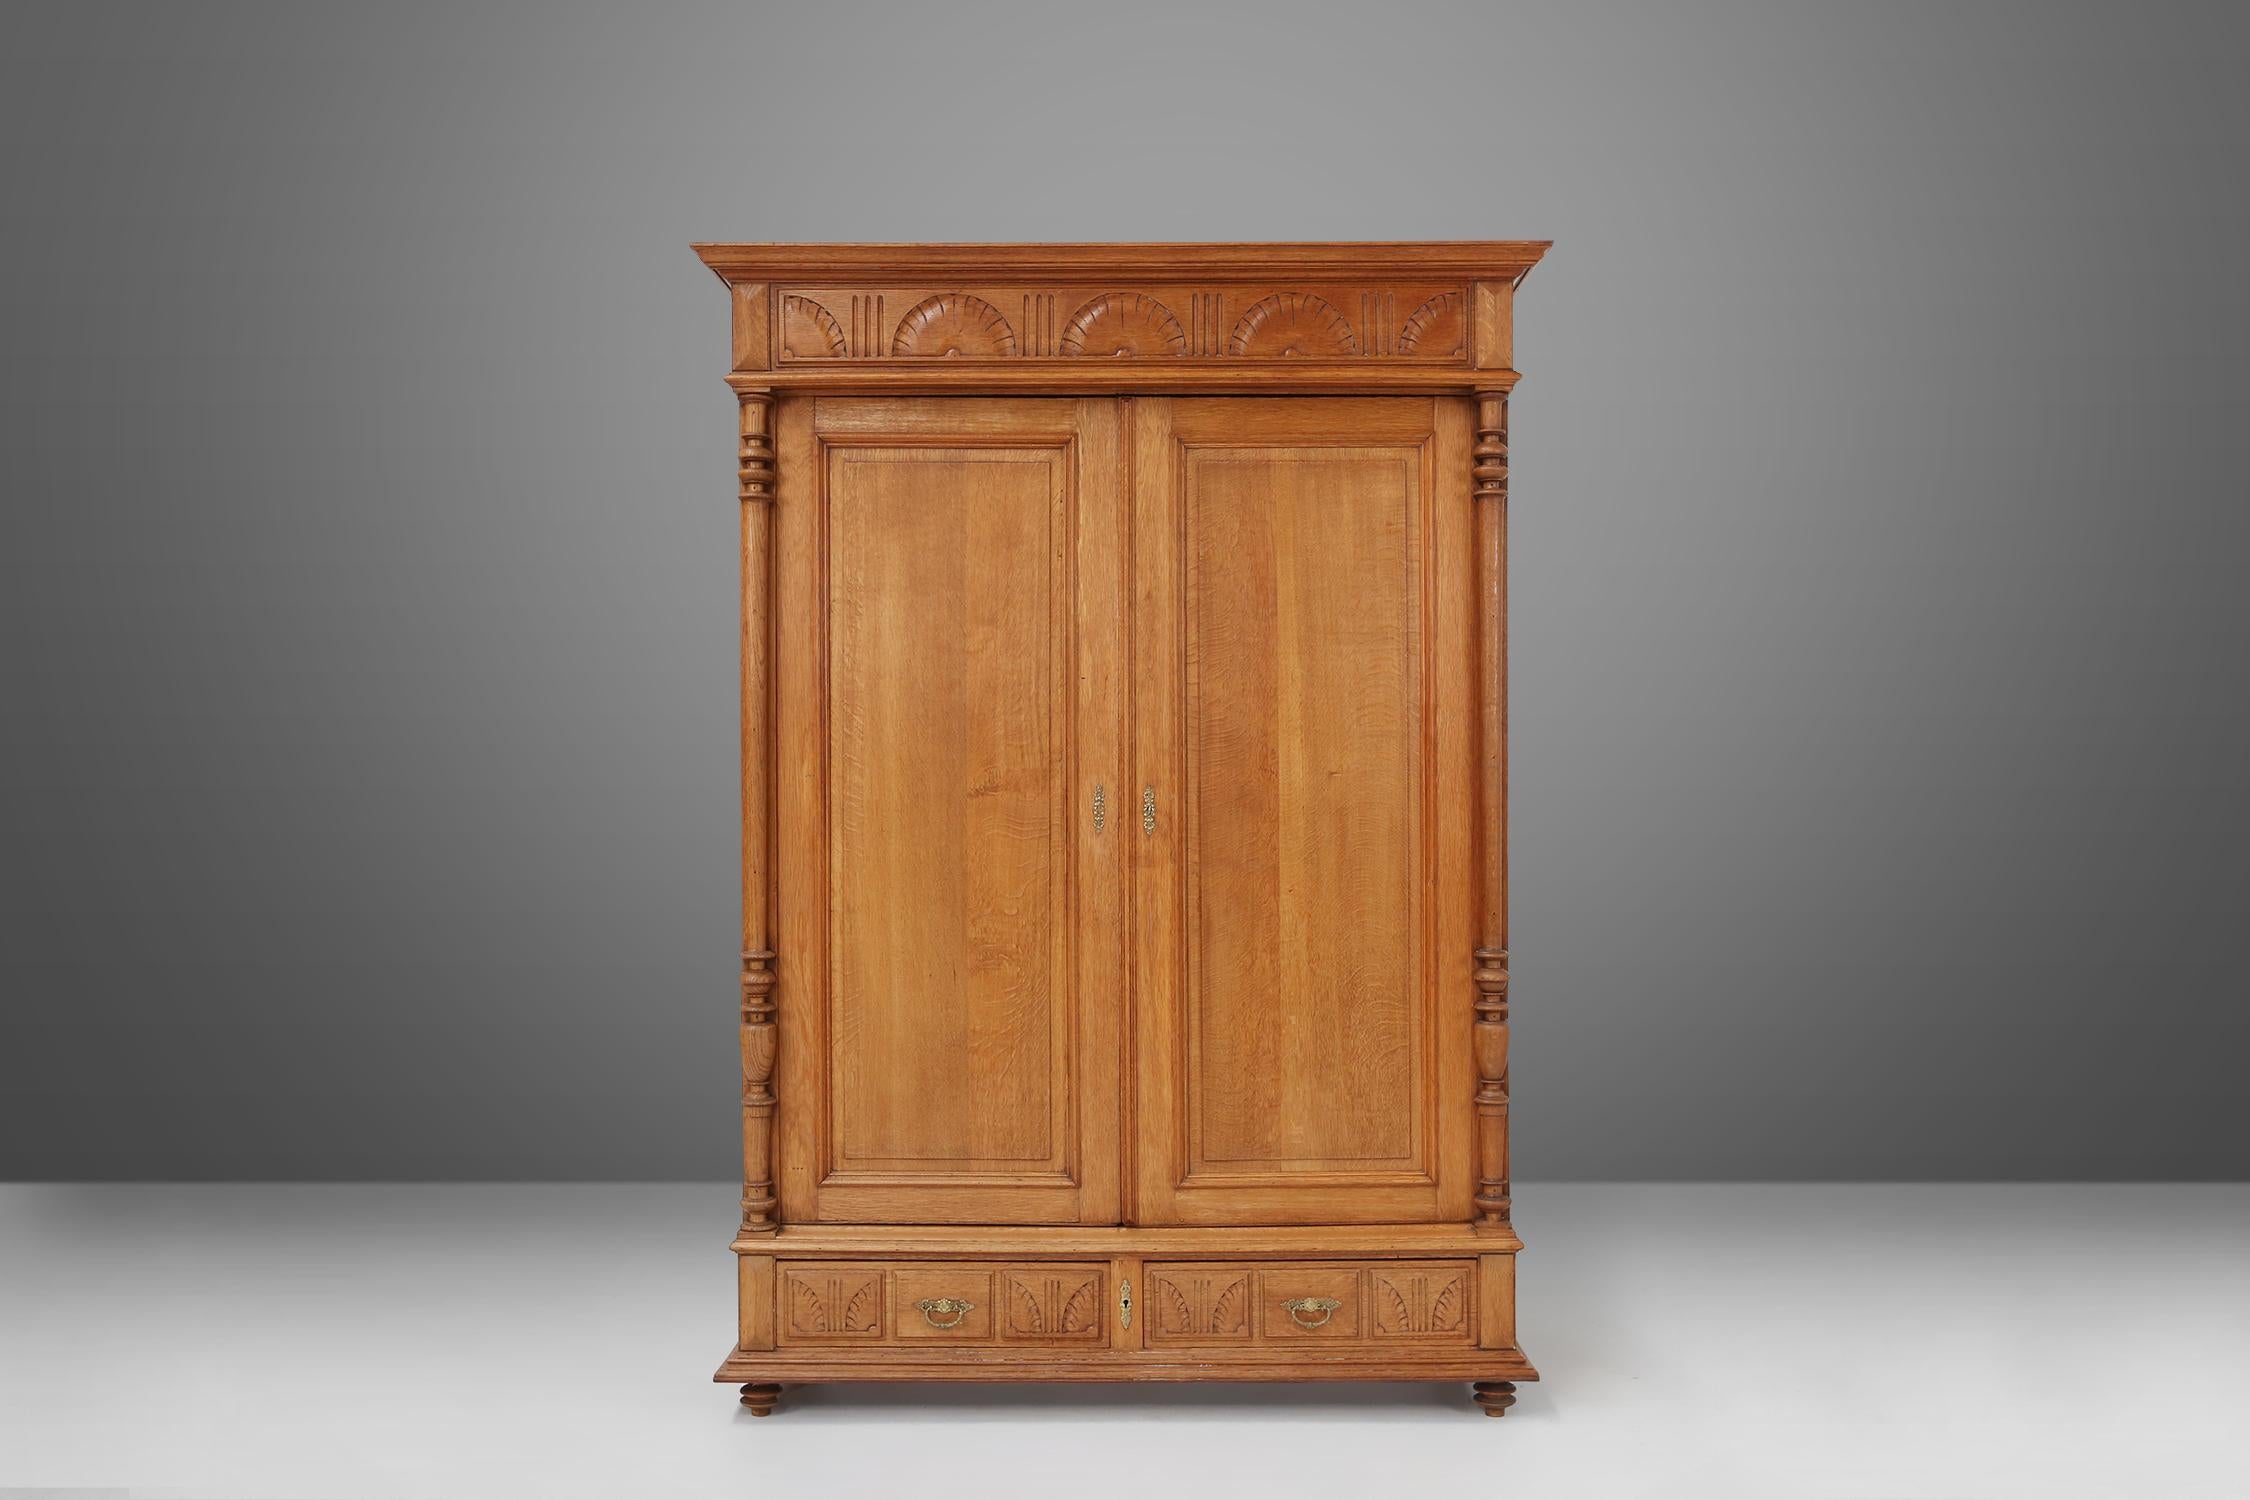 This stunning antique wooden wardrobe with two doors and two drawers is a true masterpiece. Crafted with meticulous attention to detail, this neo-renaissance armoire showcases the timeless beauty of wooden furniture. The rich, warm tones of the wood